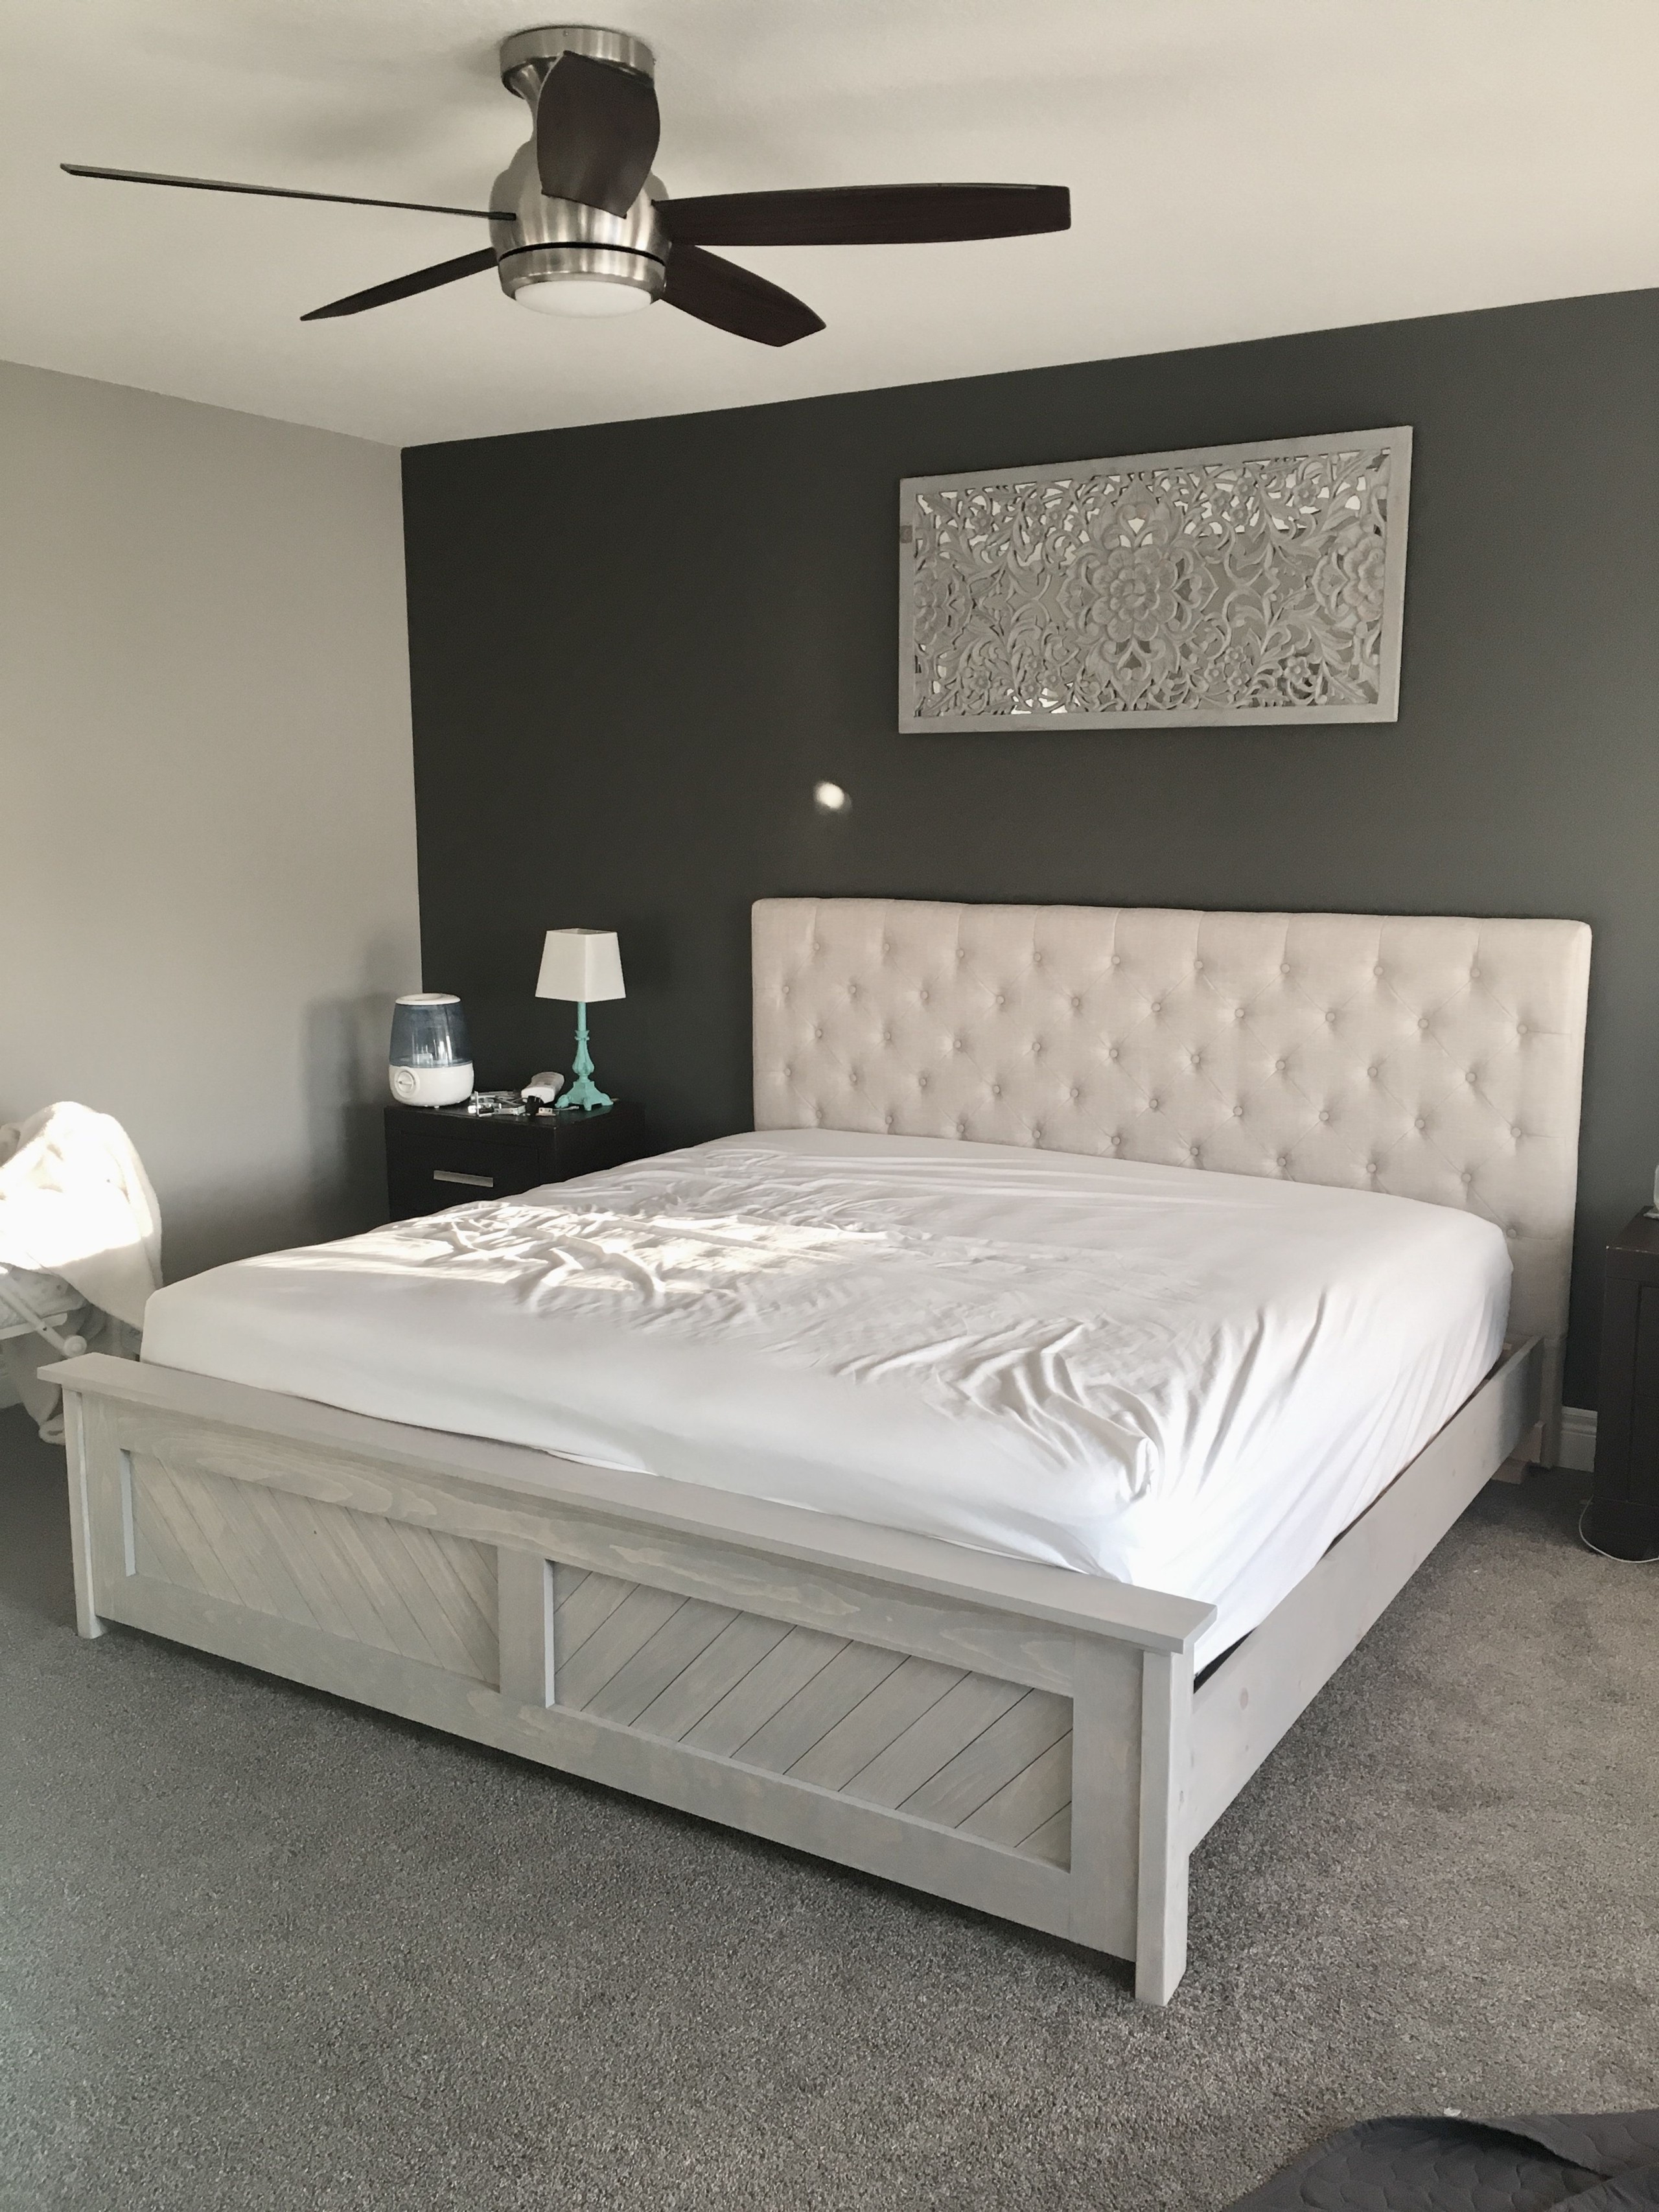 Tufted upholstered headboard with diy wood frame tufted